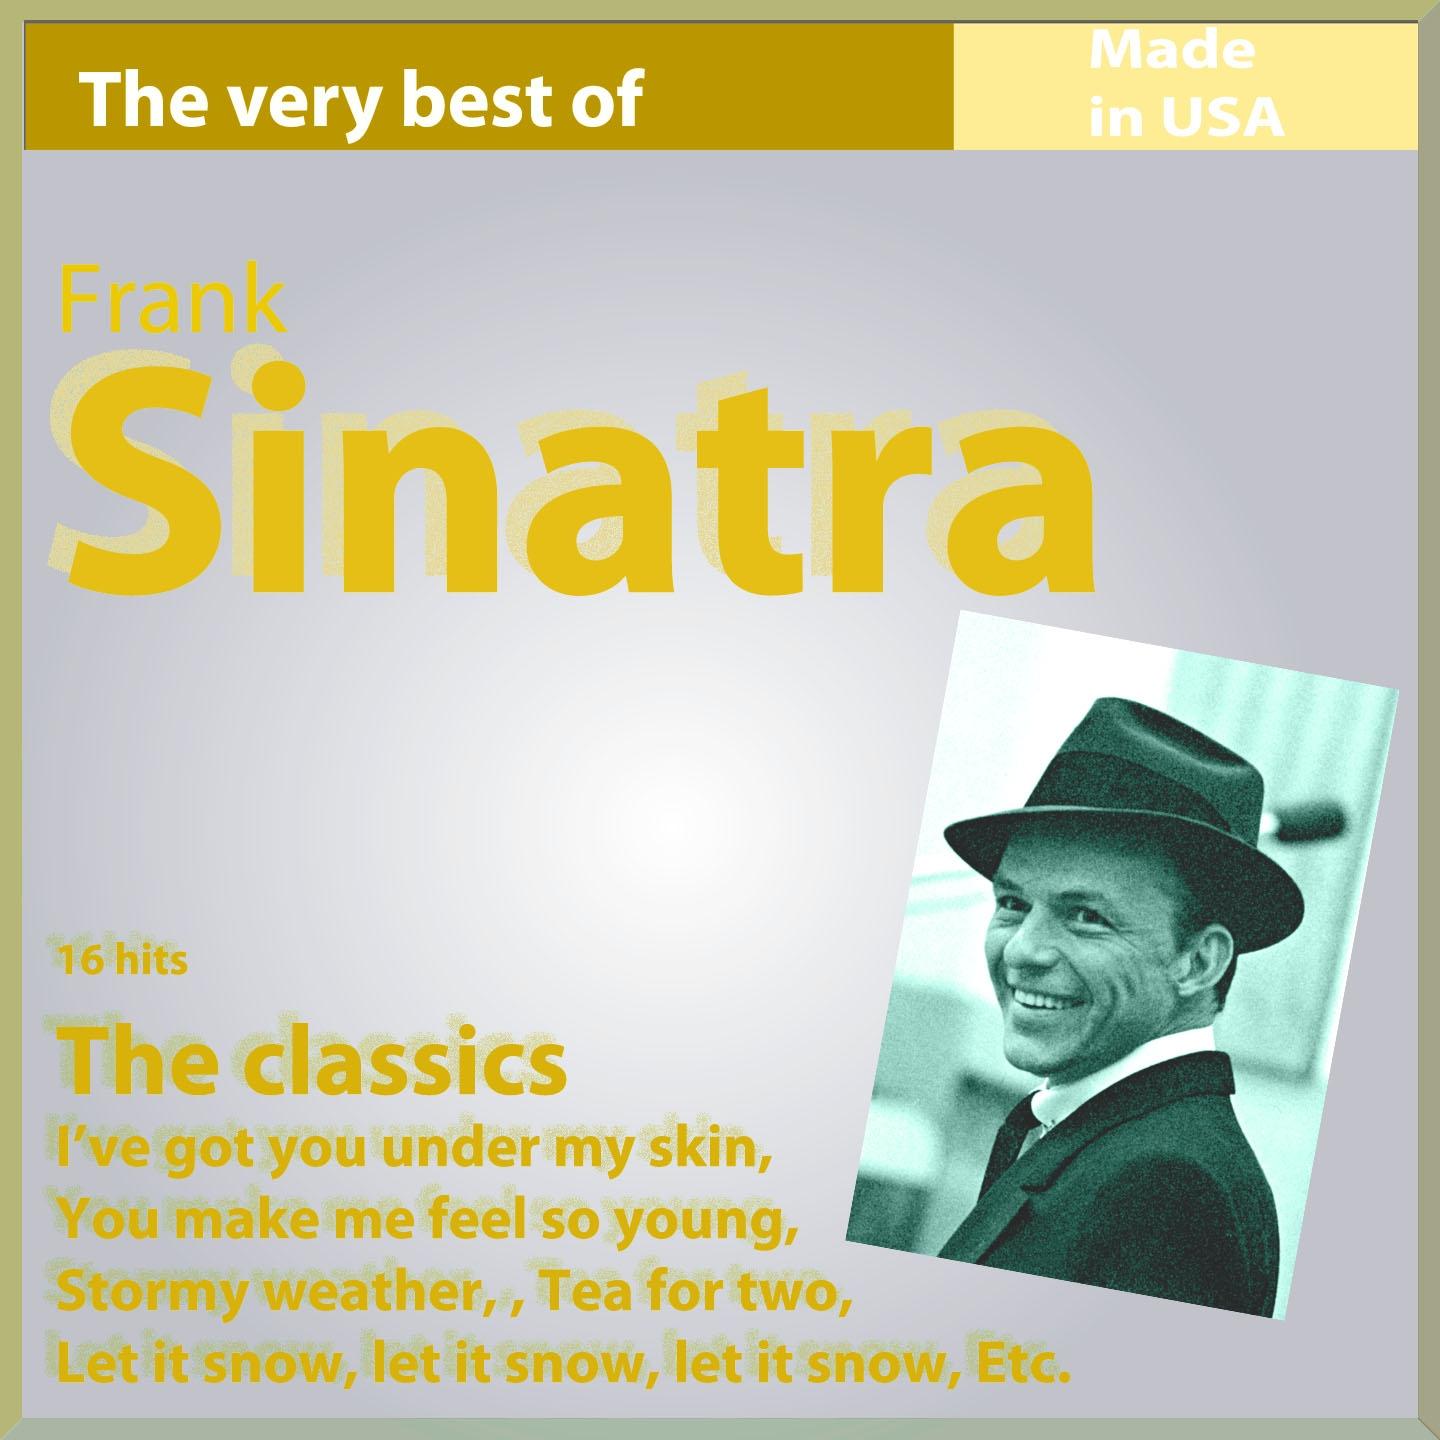 The Very Best of Frank Sinatra: 16 Hits, the Classics